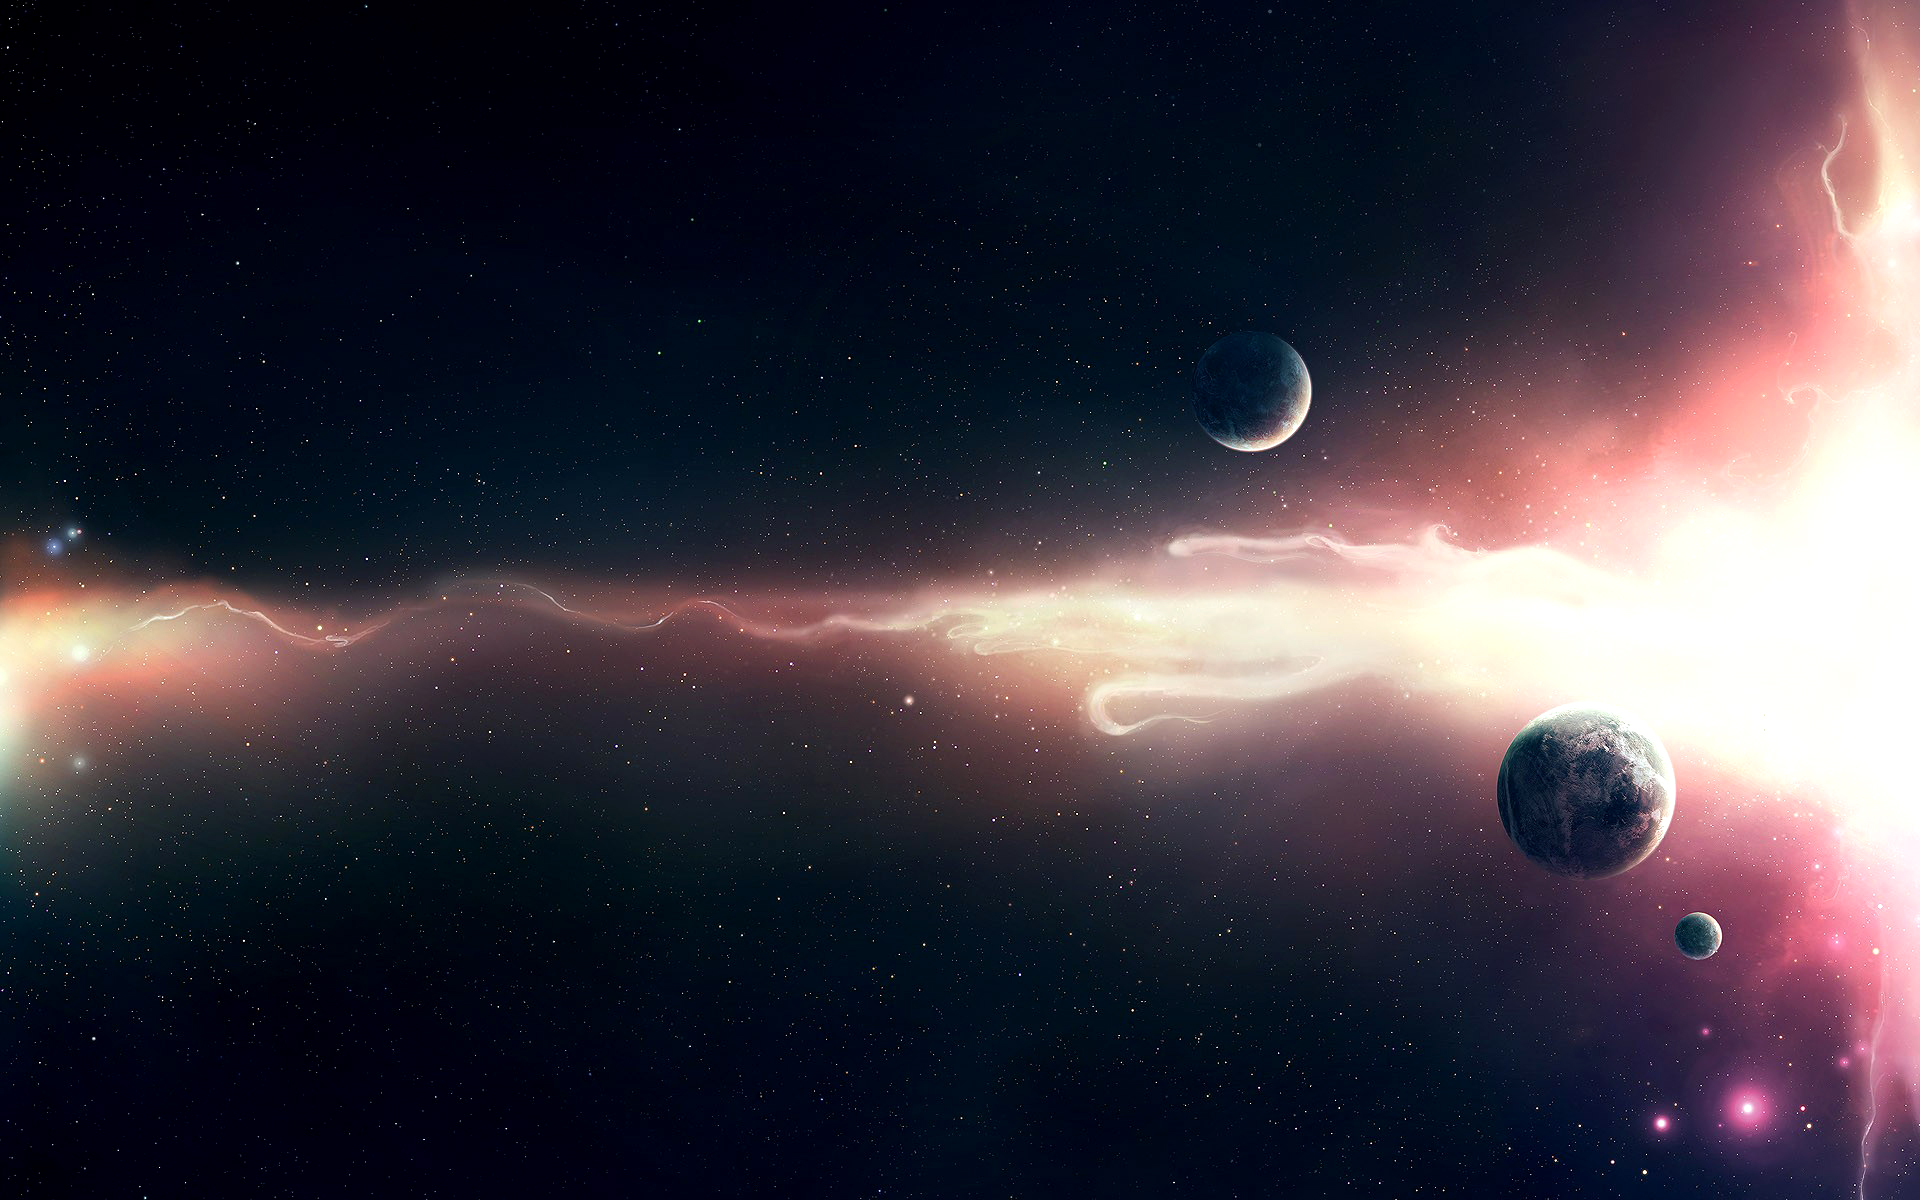 Coronal Burst desktop wallpaper with Sci Fi planets, sun, and planet in space.